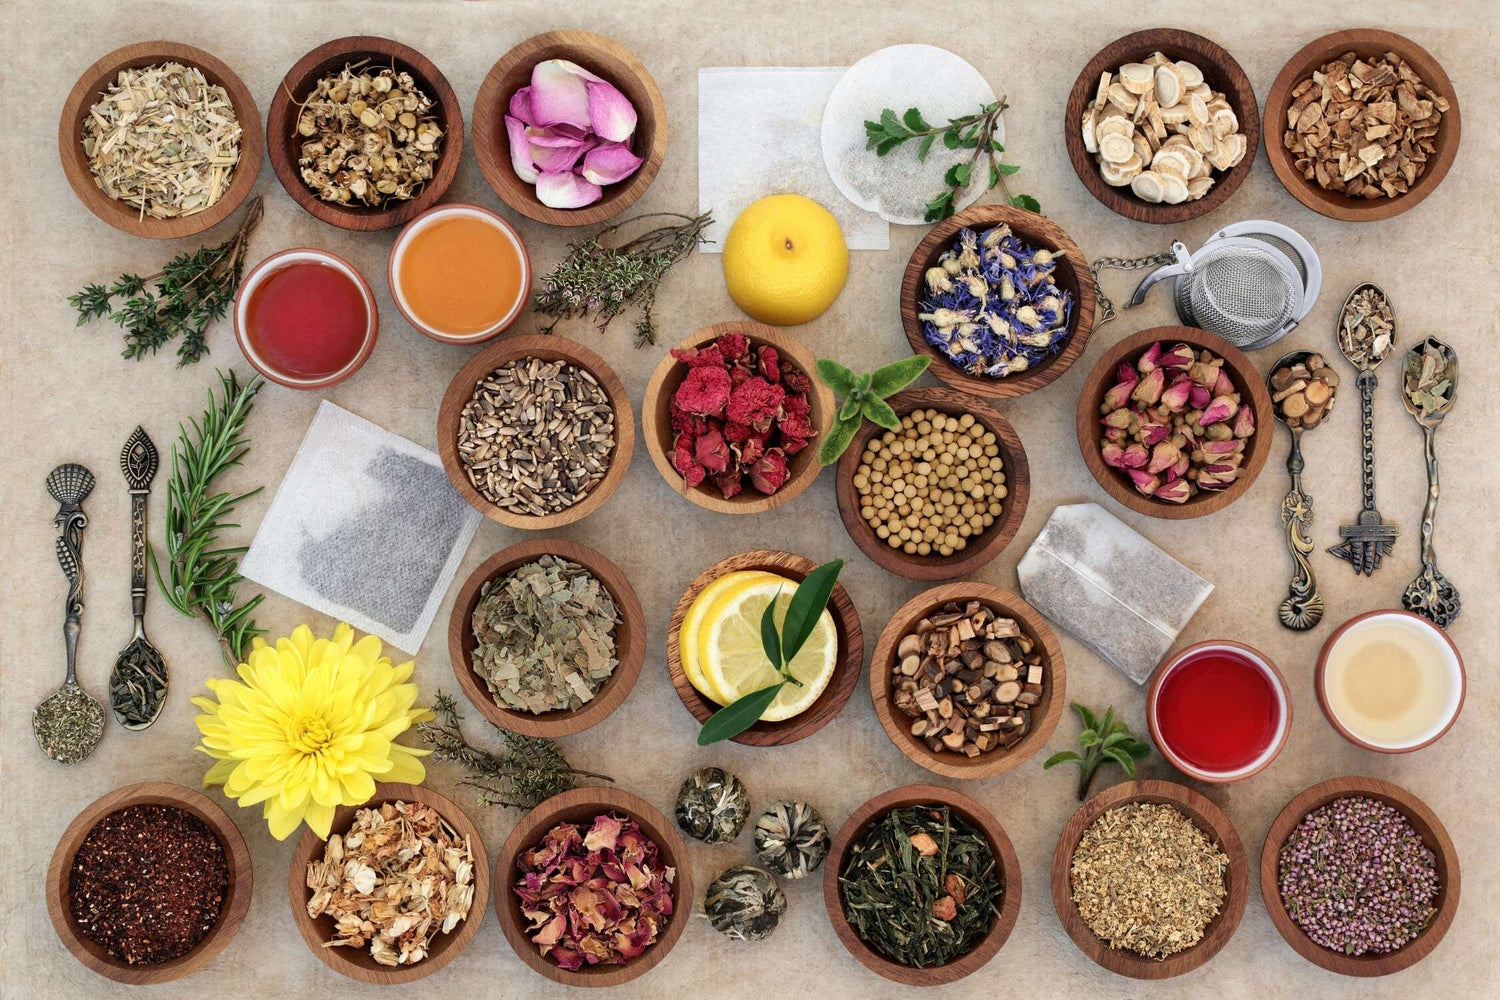 DIY Herbal Teas: How to Create Your Own Blends